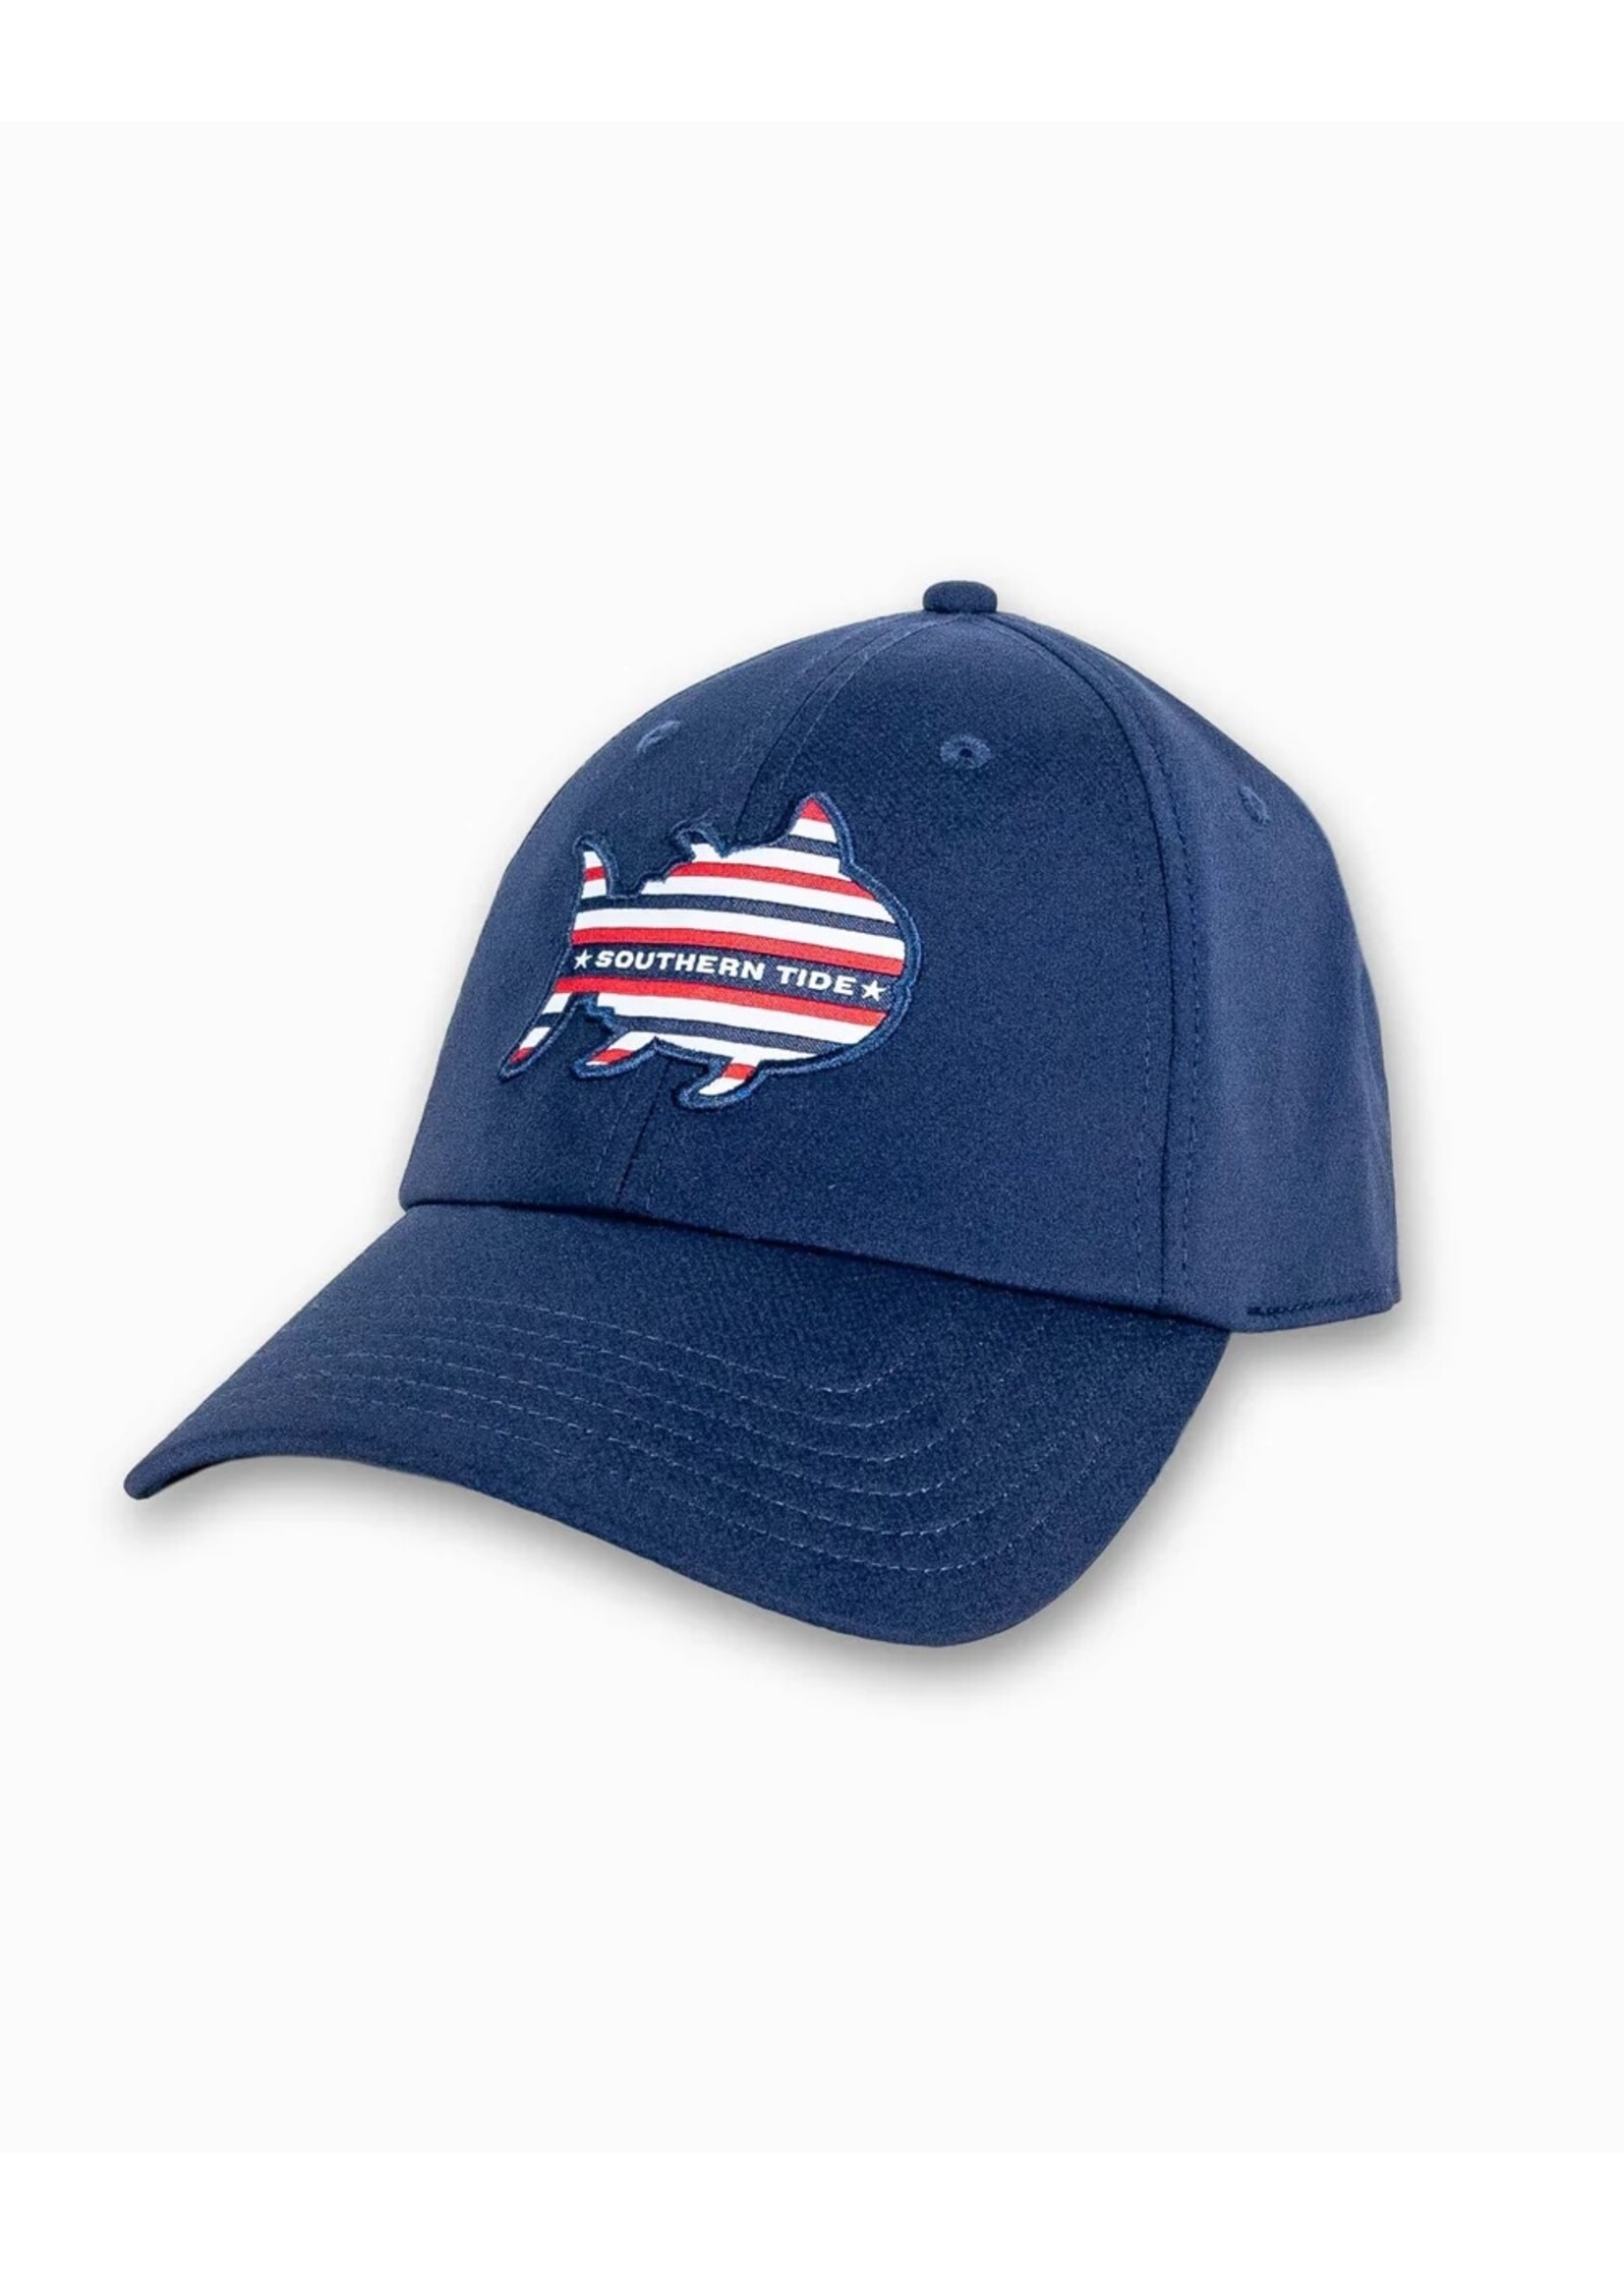 Southern Tide Southern Tide M Rockets Red Glare Perf Hat